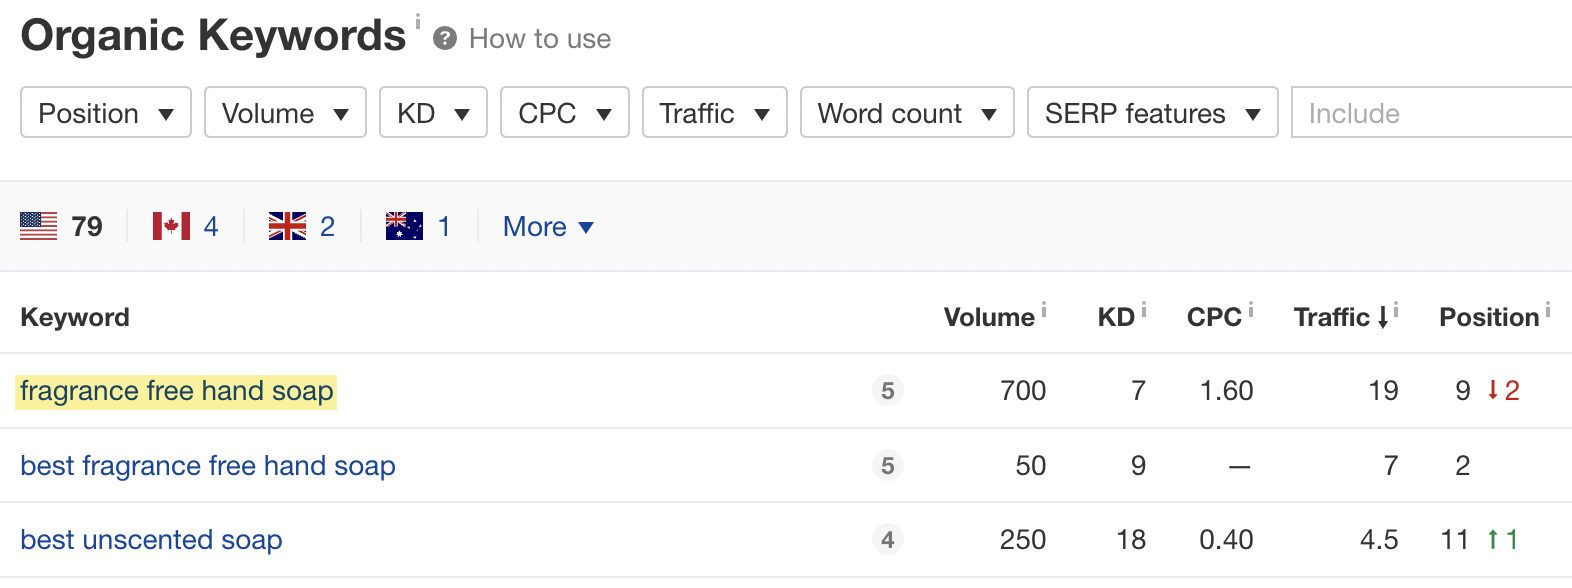 List of keywords with matching data like Volume, KD, etc.